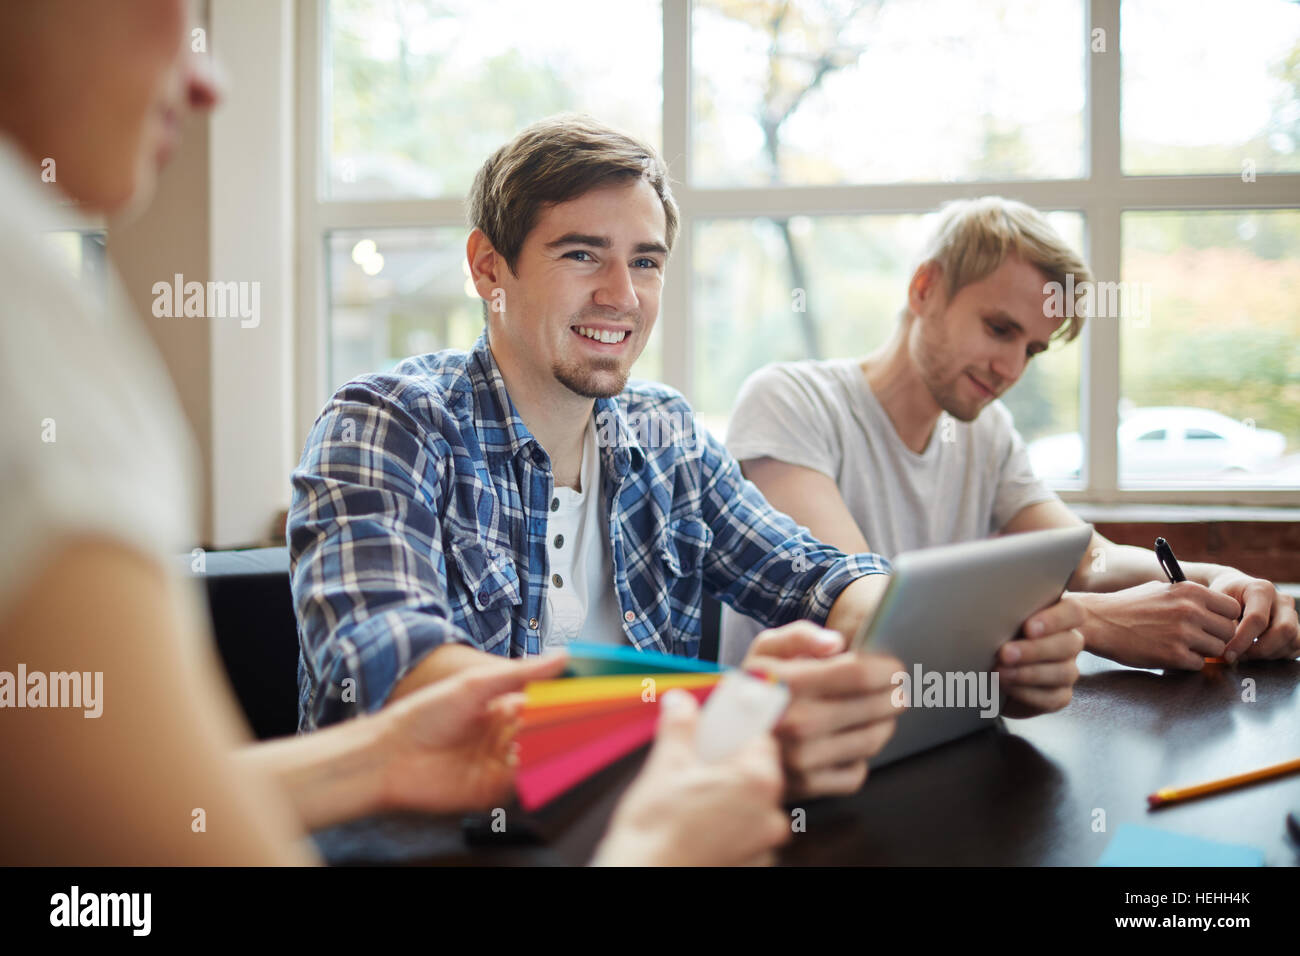 Young specialist listening to coach at lesson or conference Stock Photo